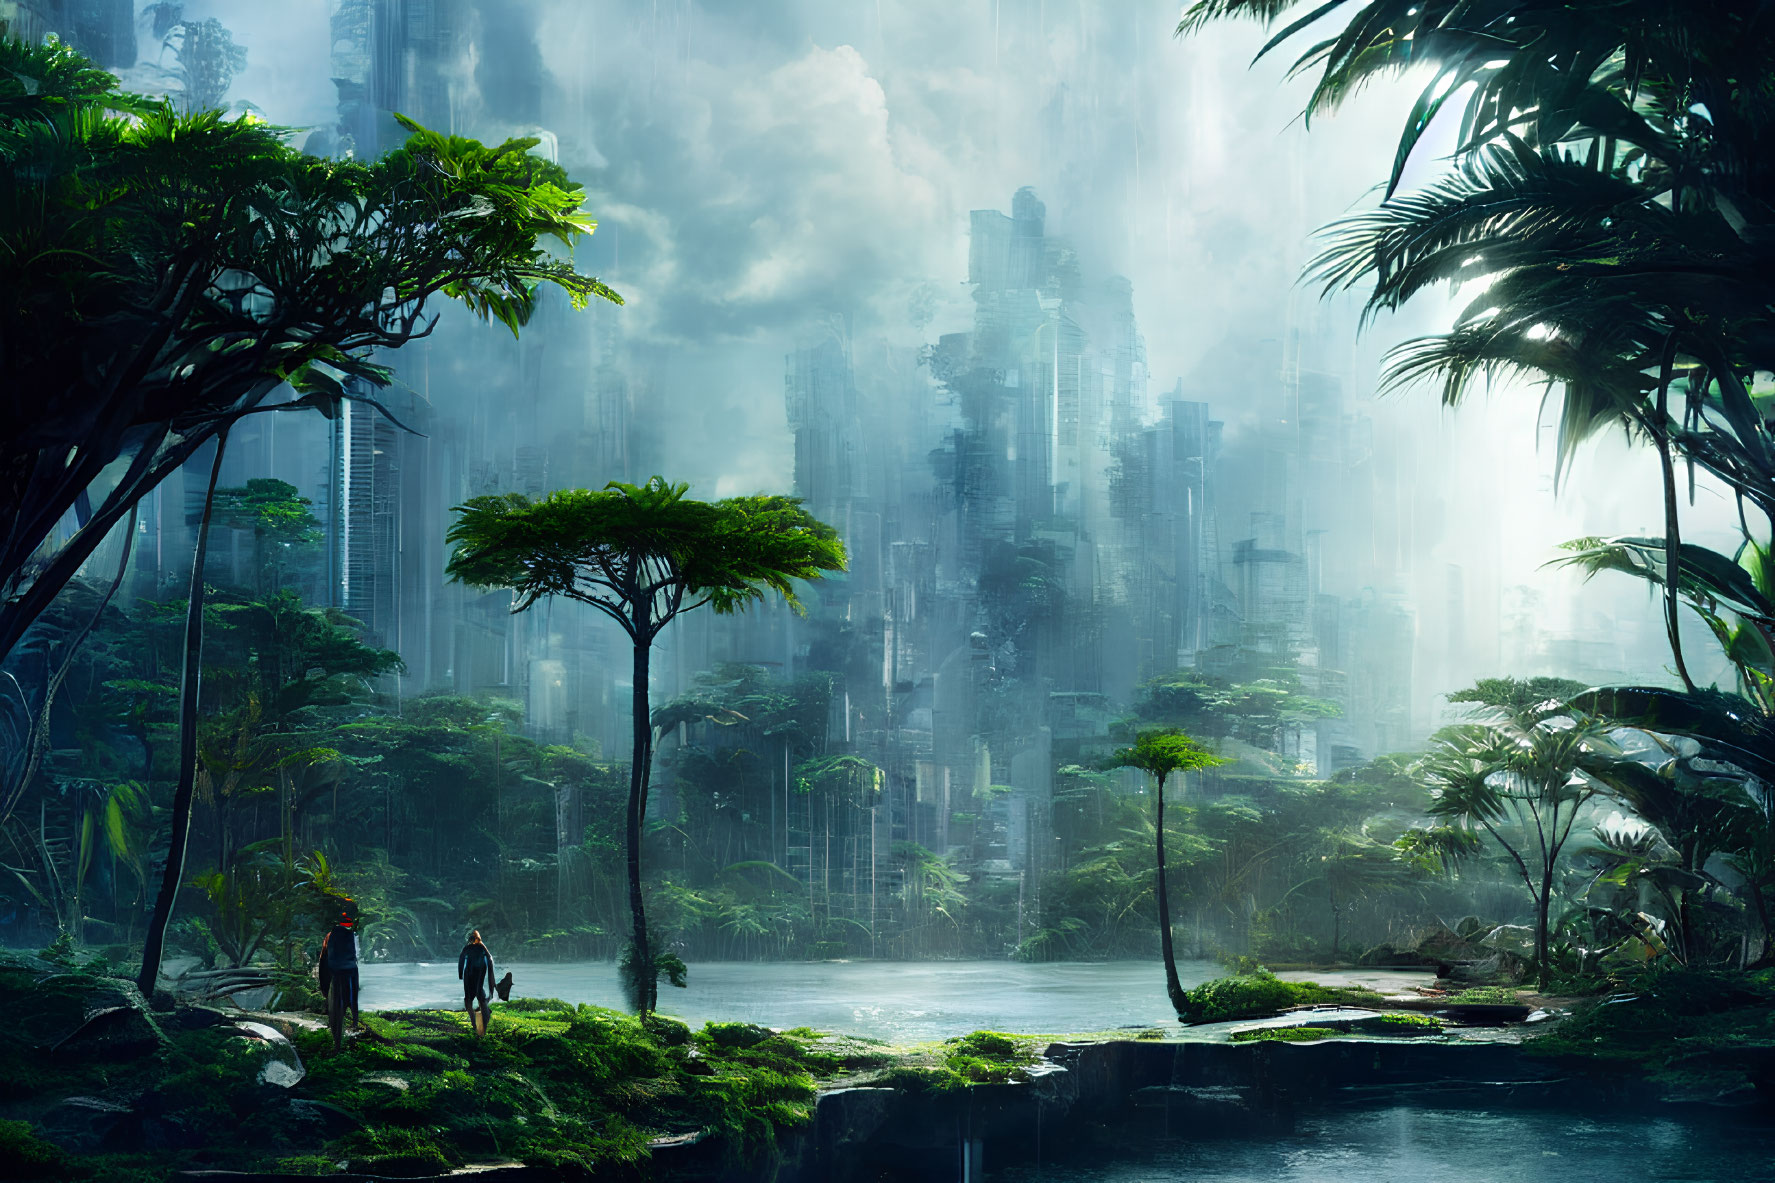 Futuristic cityscape backdrop with lush greenery, misty ambiance, figures near serene water.